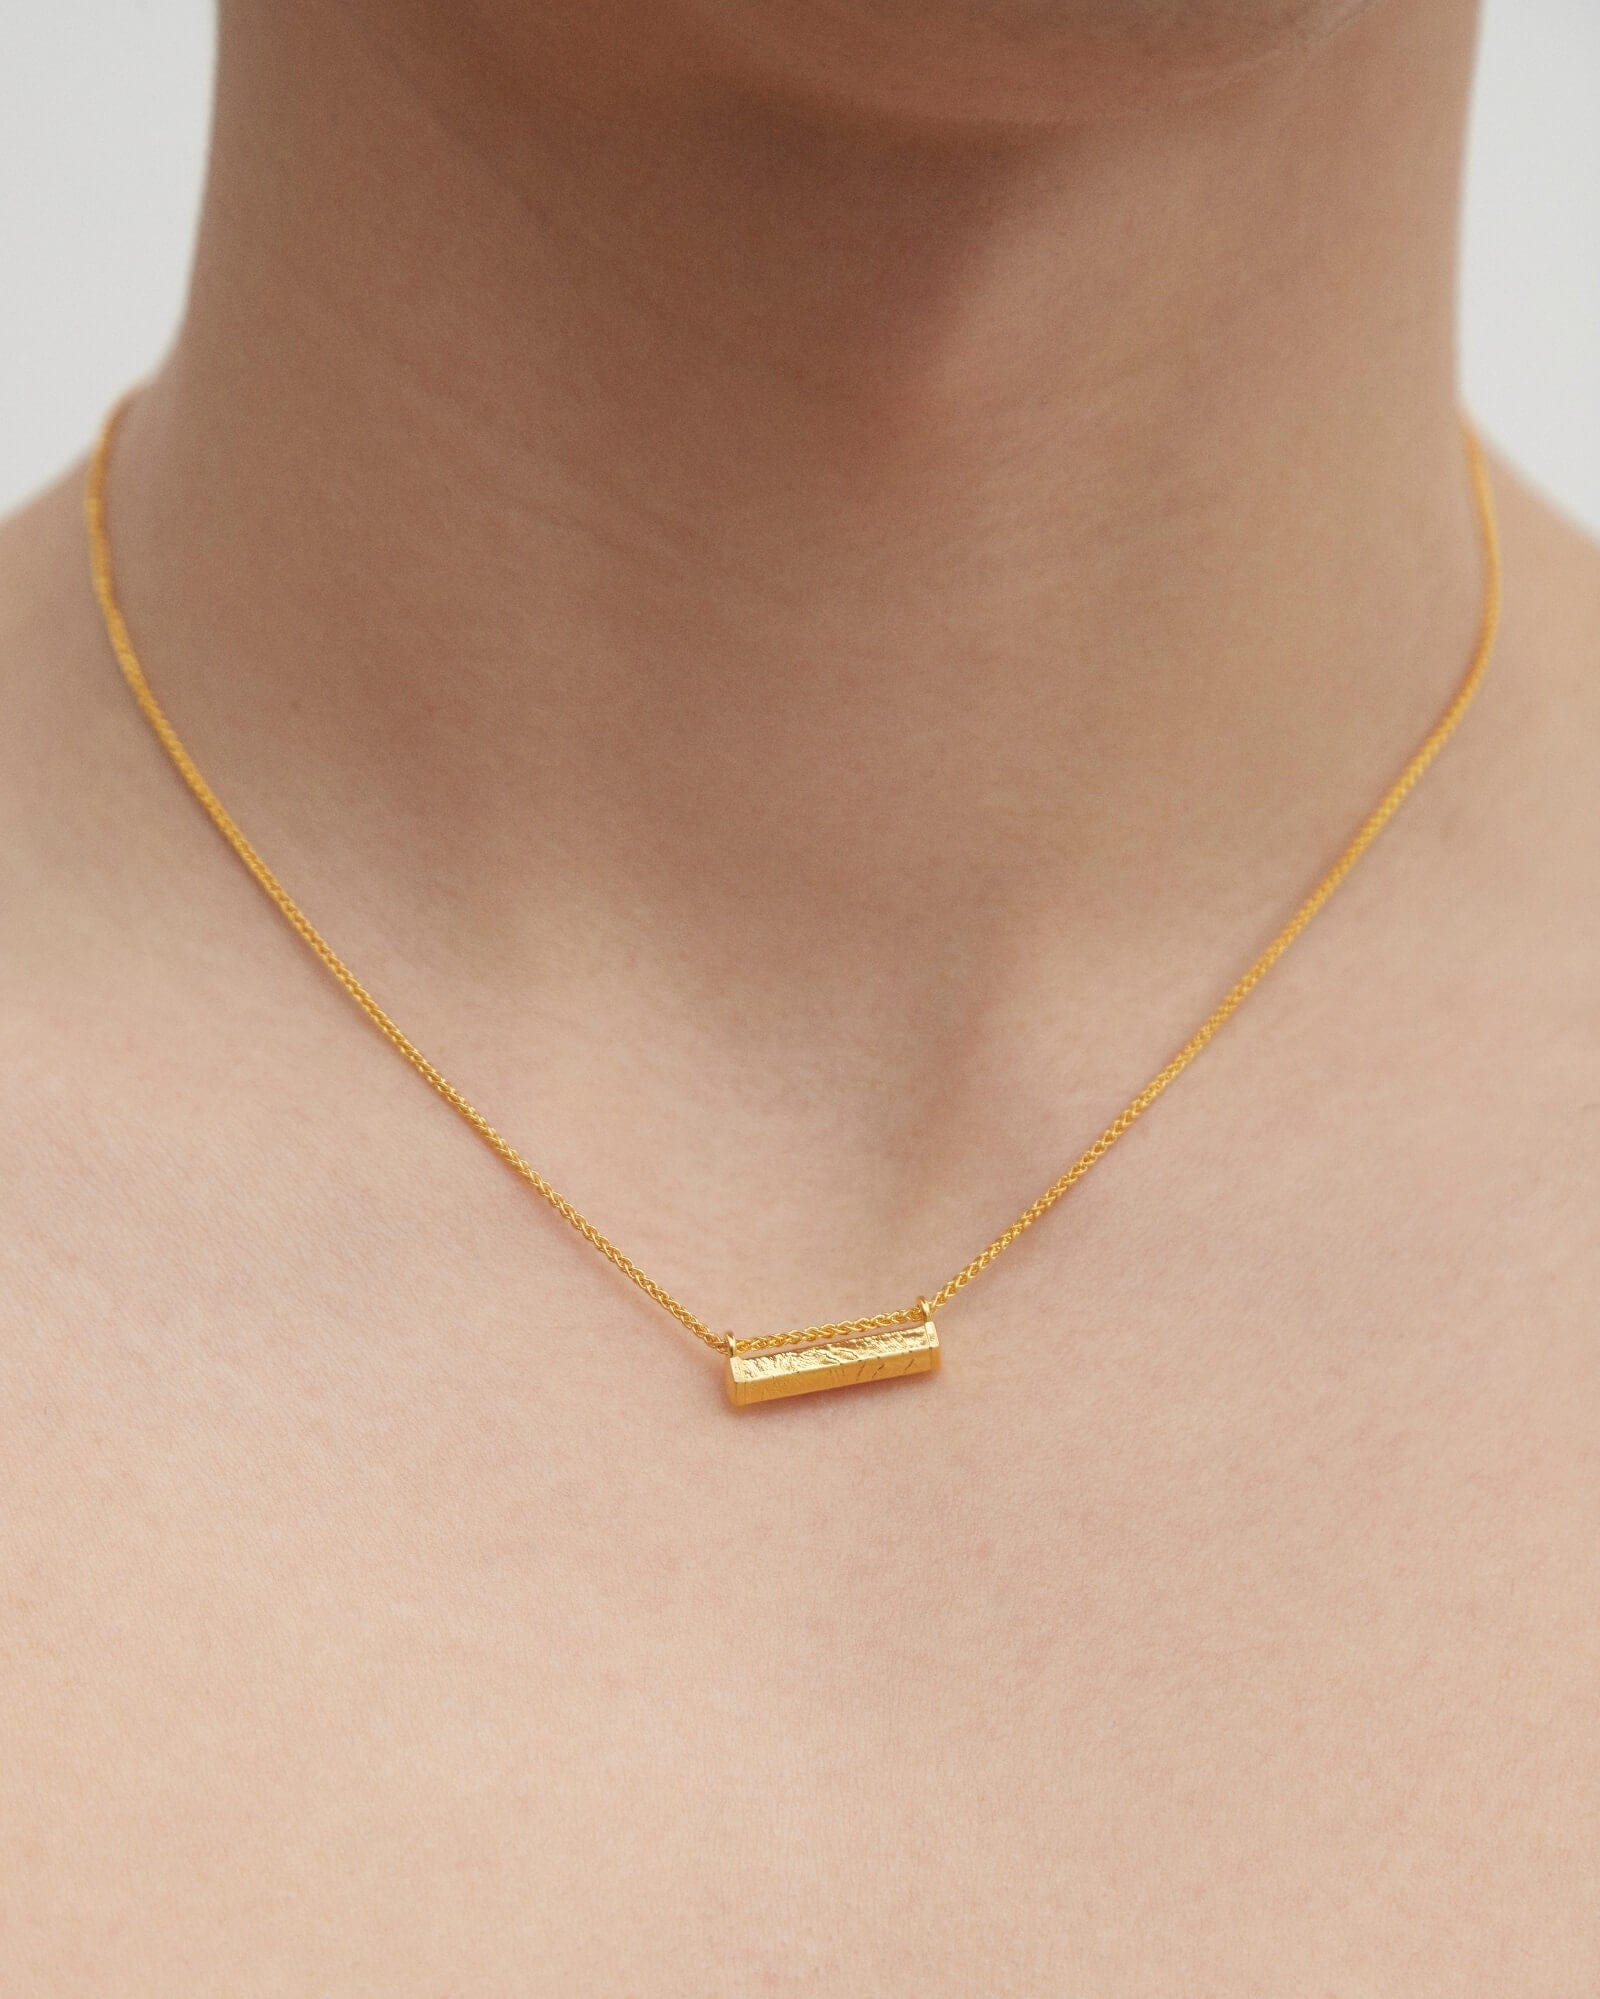 Dear Letterman Necklace Isama Gold Necklace